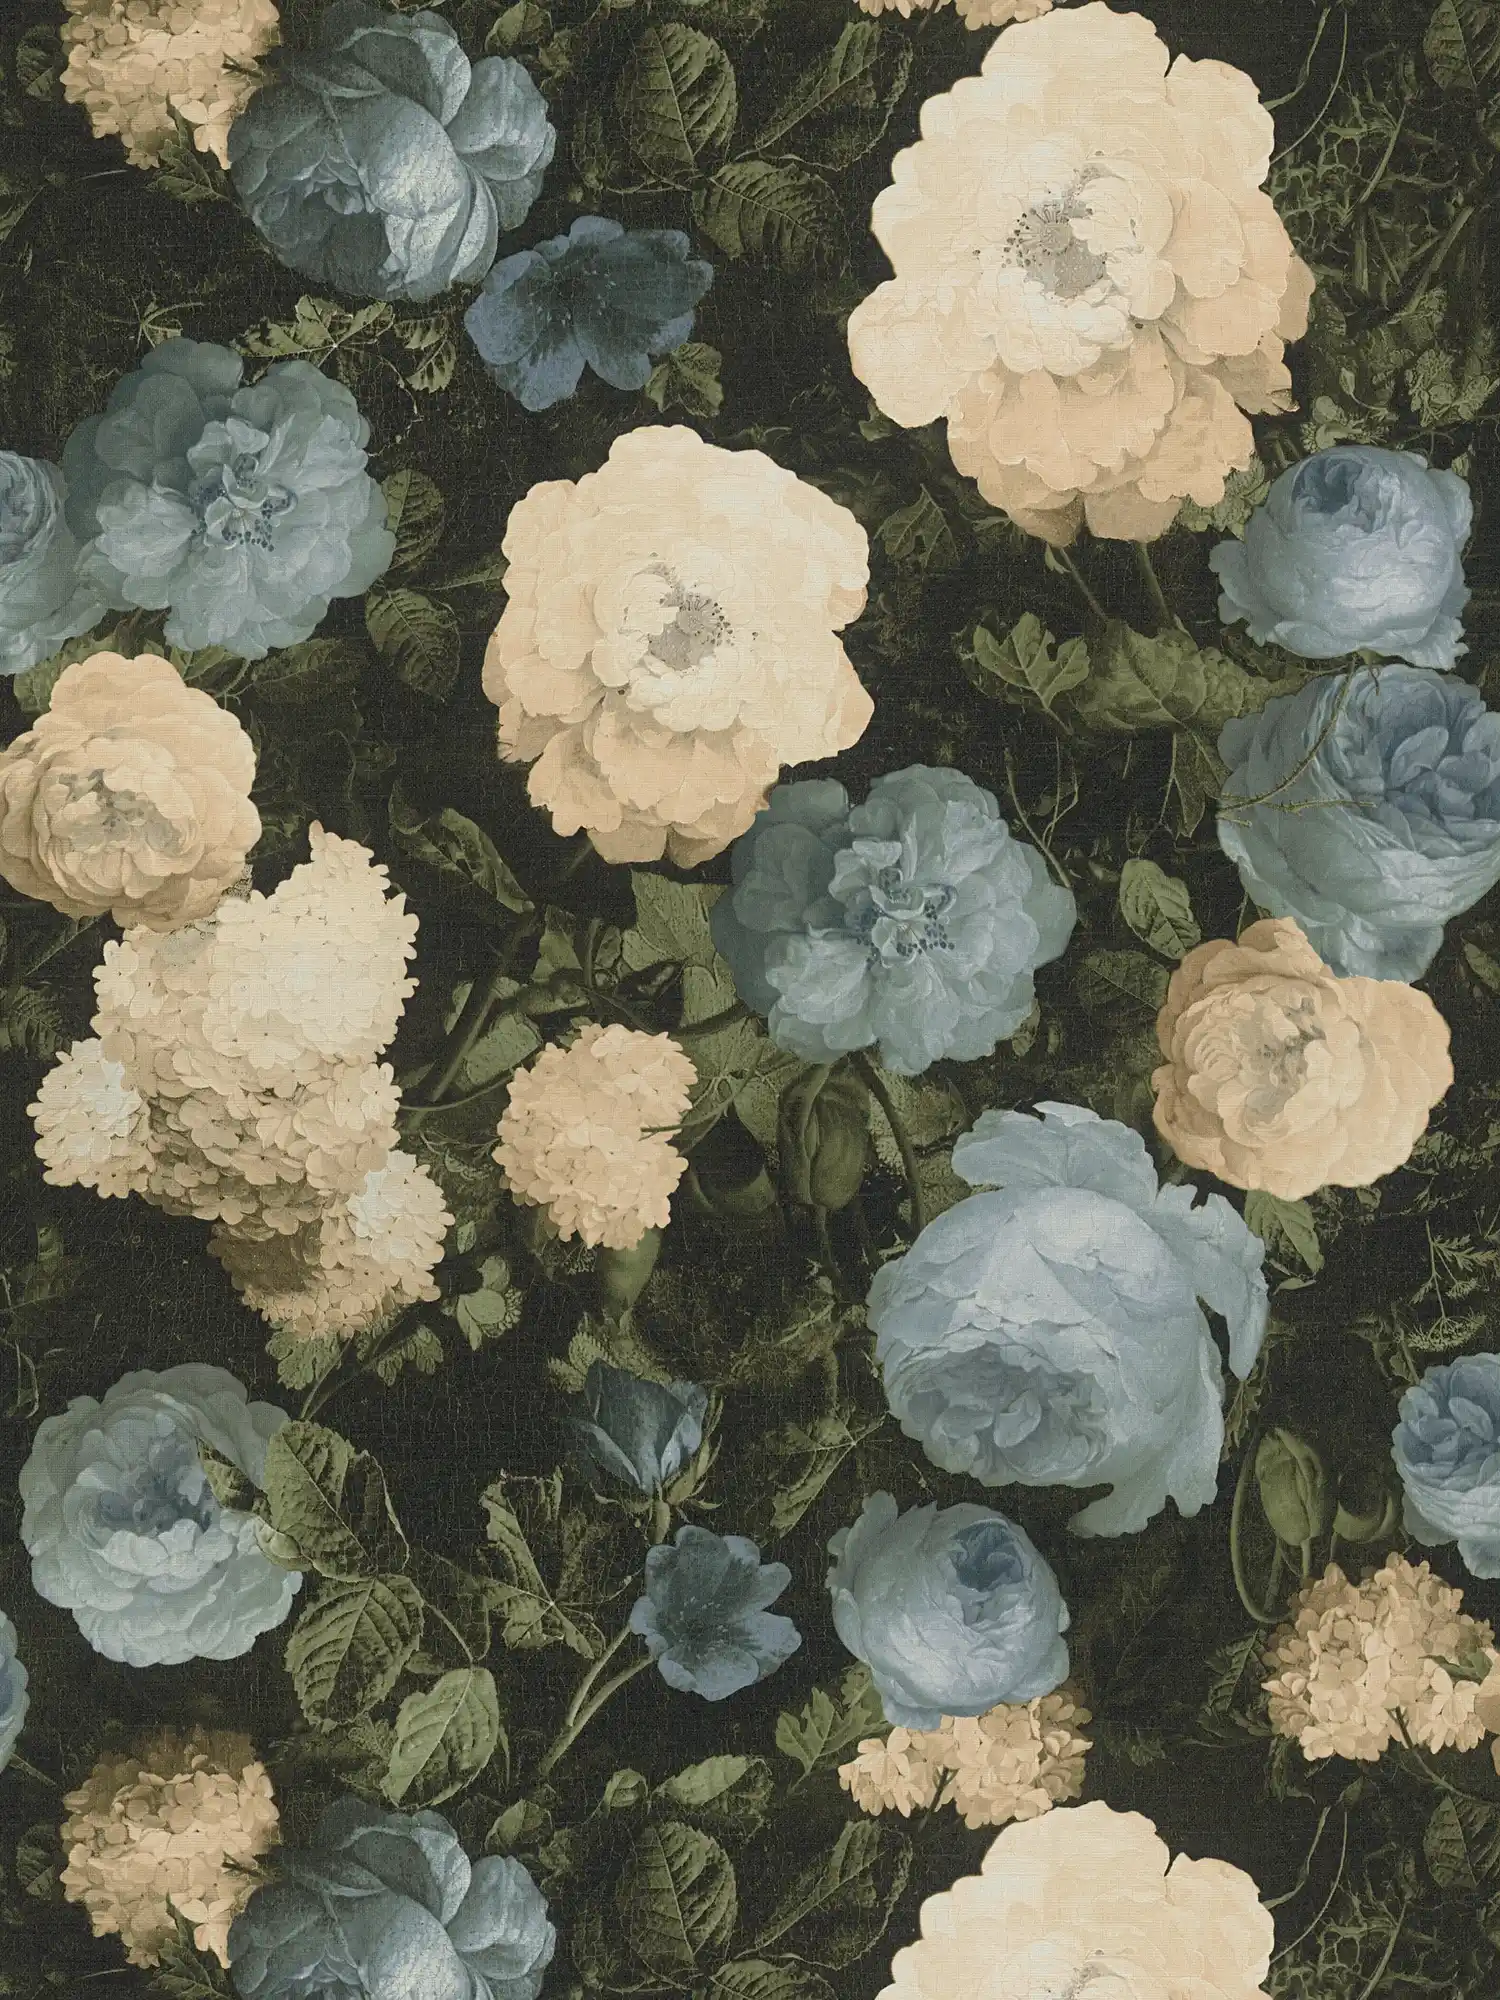 Roses wallpaper, classic floral pattern - blue, green, cream
